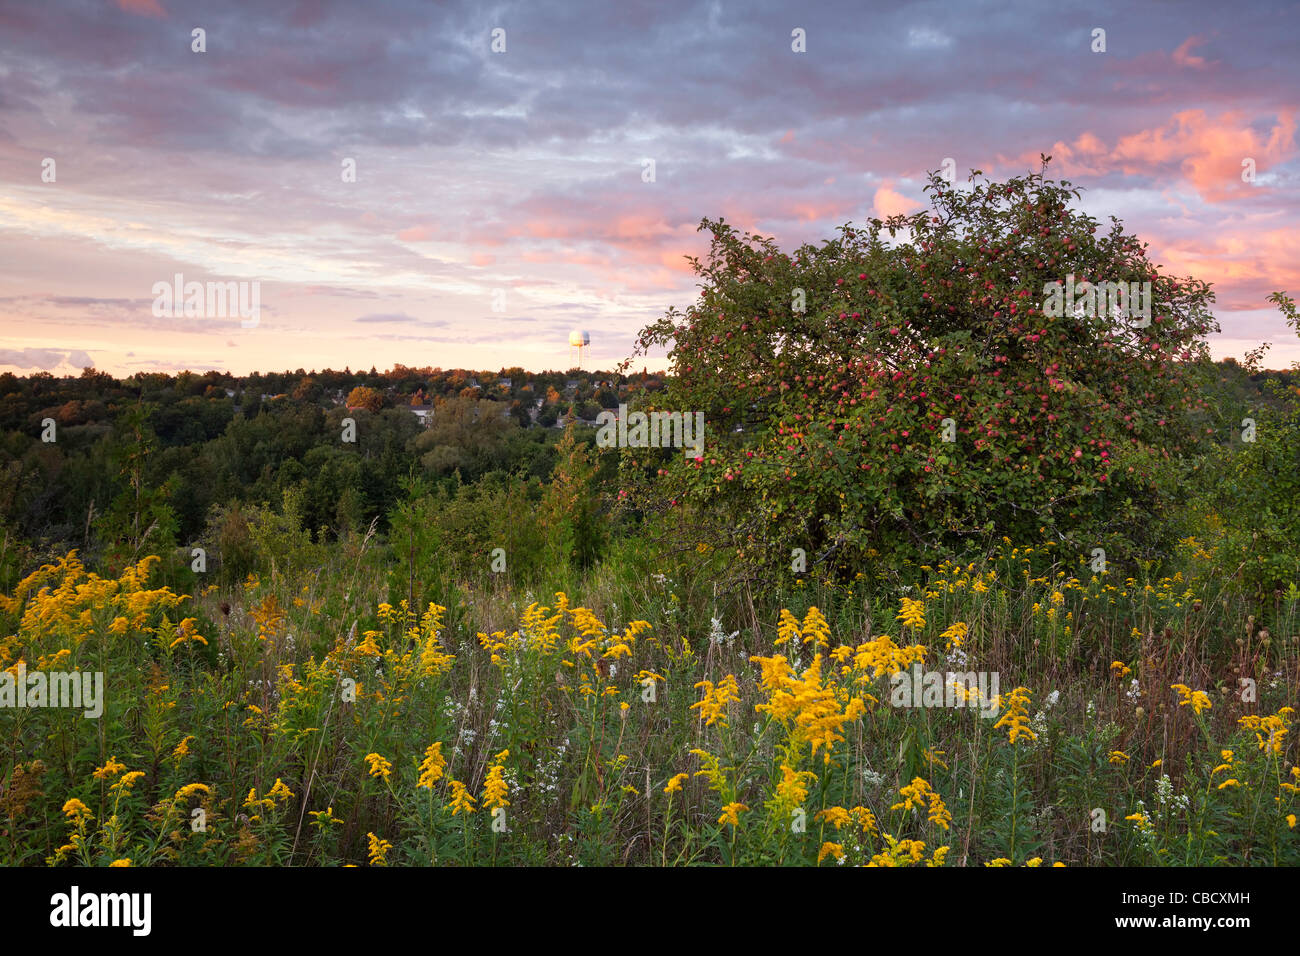 Goldenrod and an apple tree during sunset in Rogers Reservoir, East Gwillimbury, Ontario, Canada. Stock Photo